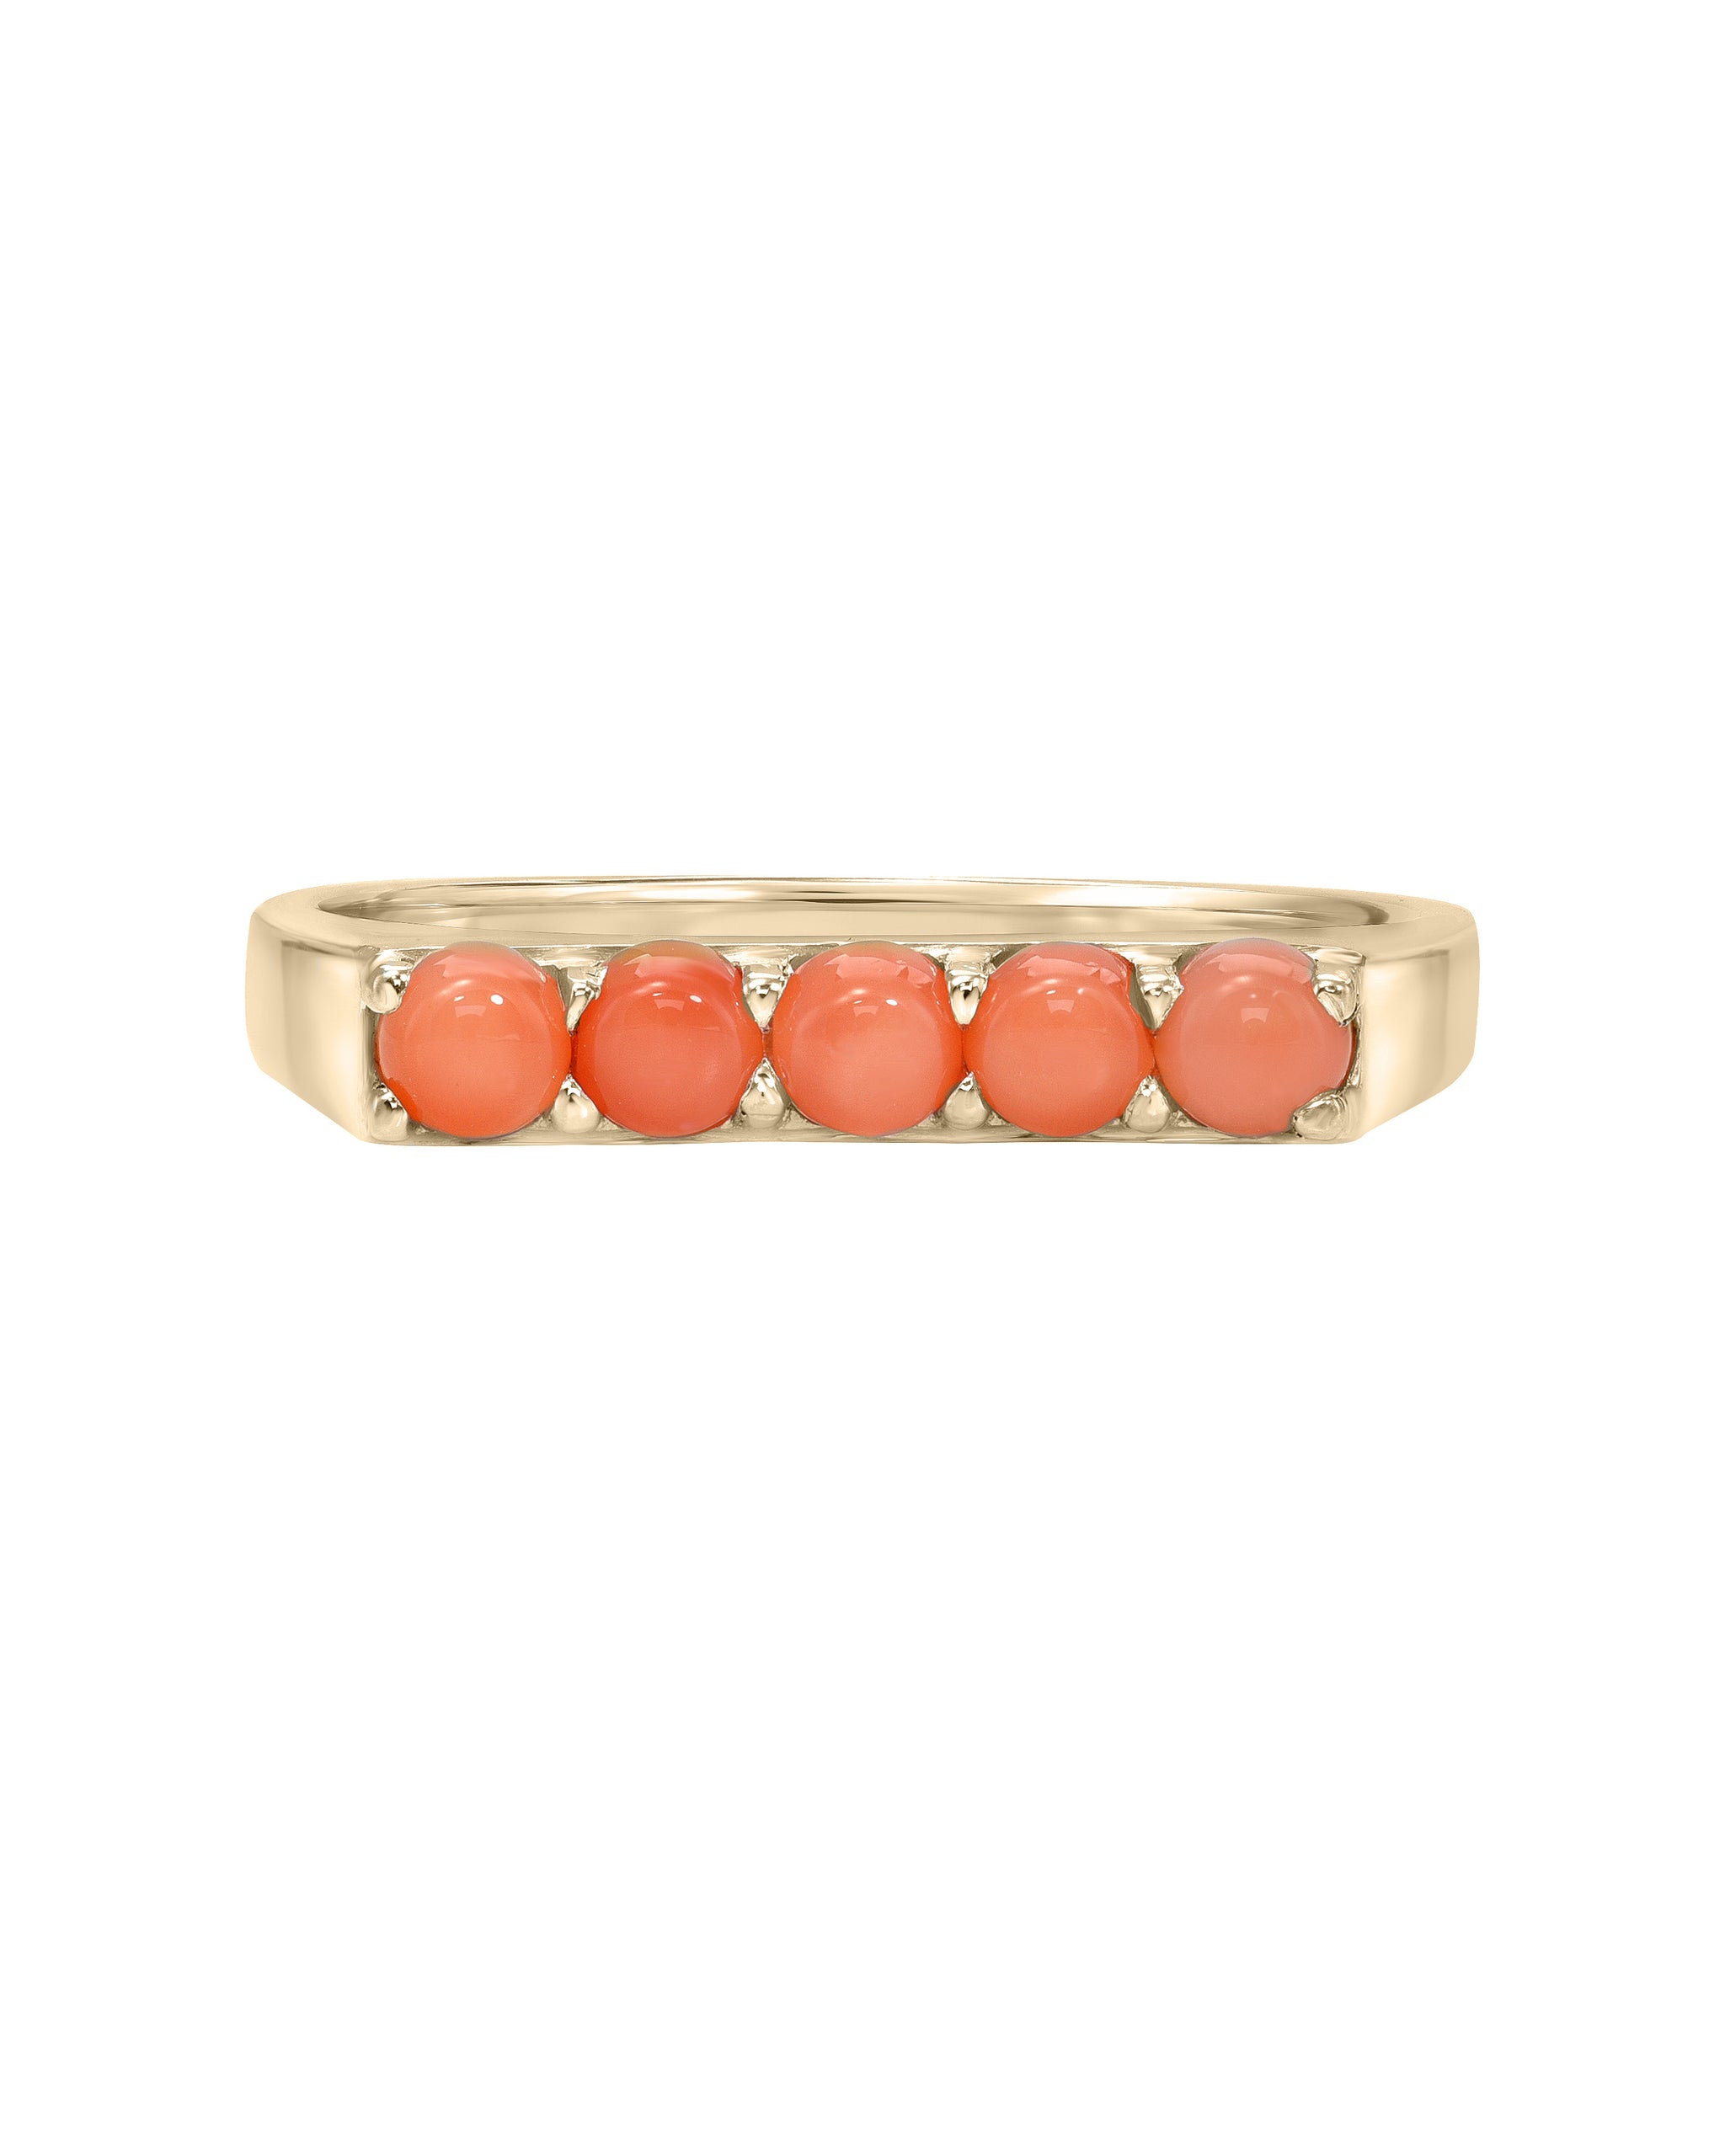 River Signet Ring, 14k Gold Ring with 3mm Coral Stones, Handmade in Los Angeles California by Turquoise and Tobacco